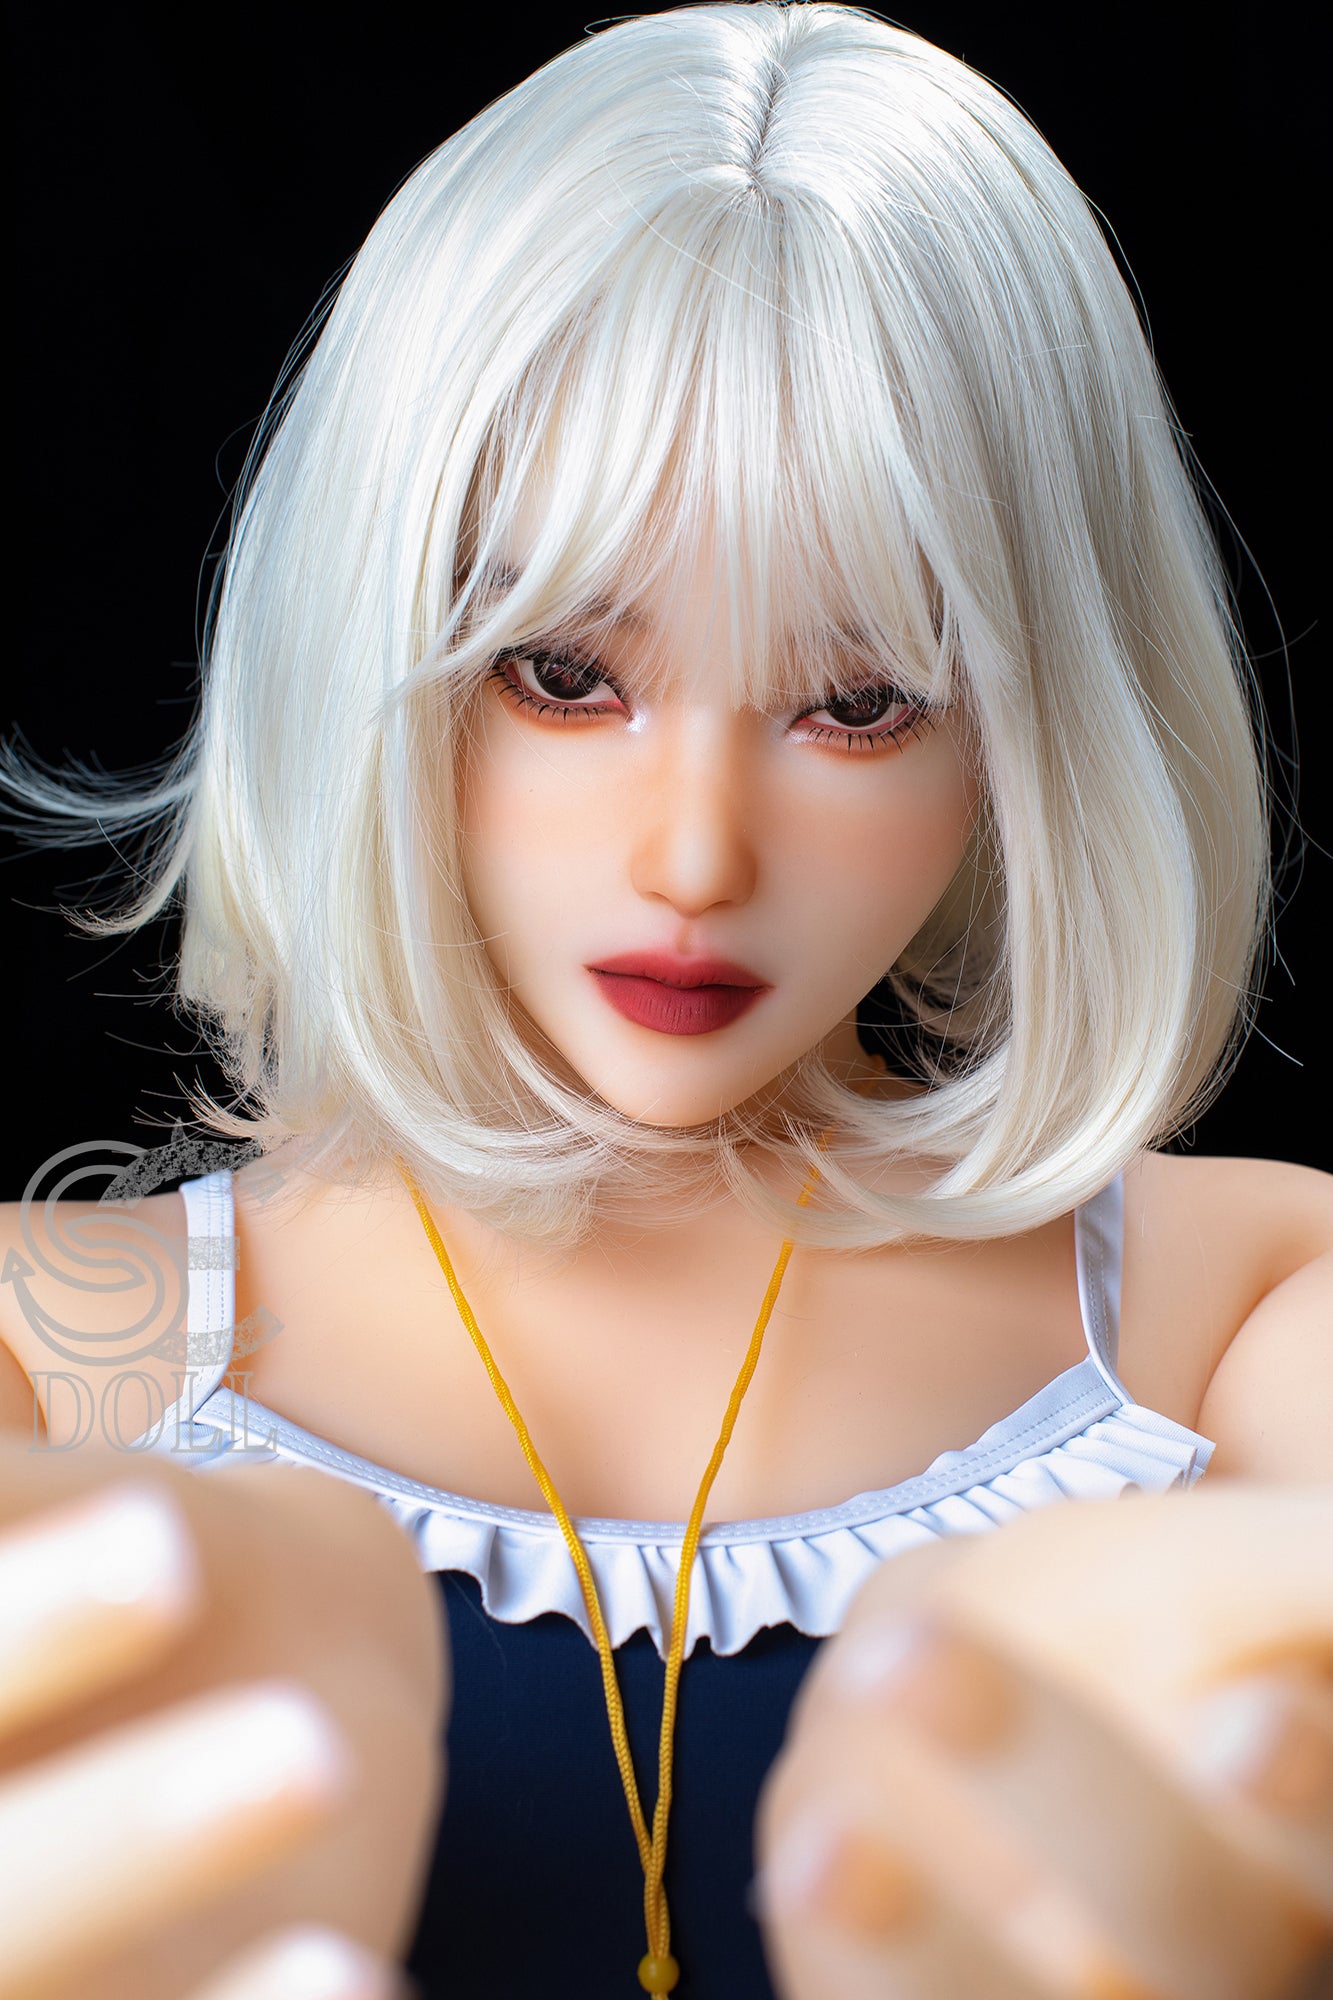 SEDOLL 163 cm E TPE - Mikoto | Buy Sex Dolls at DOLLS ACTUALLY